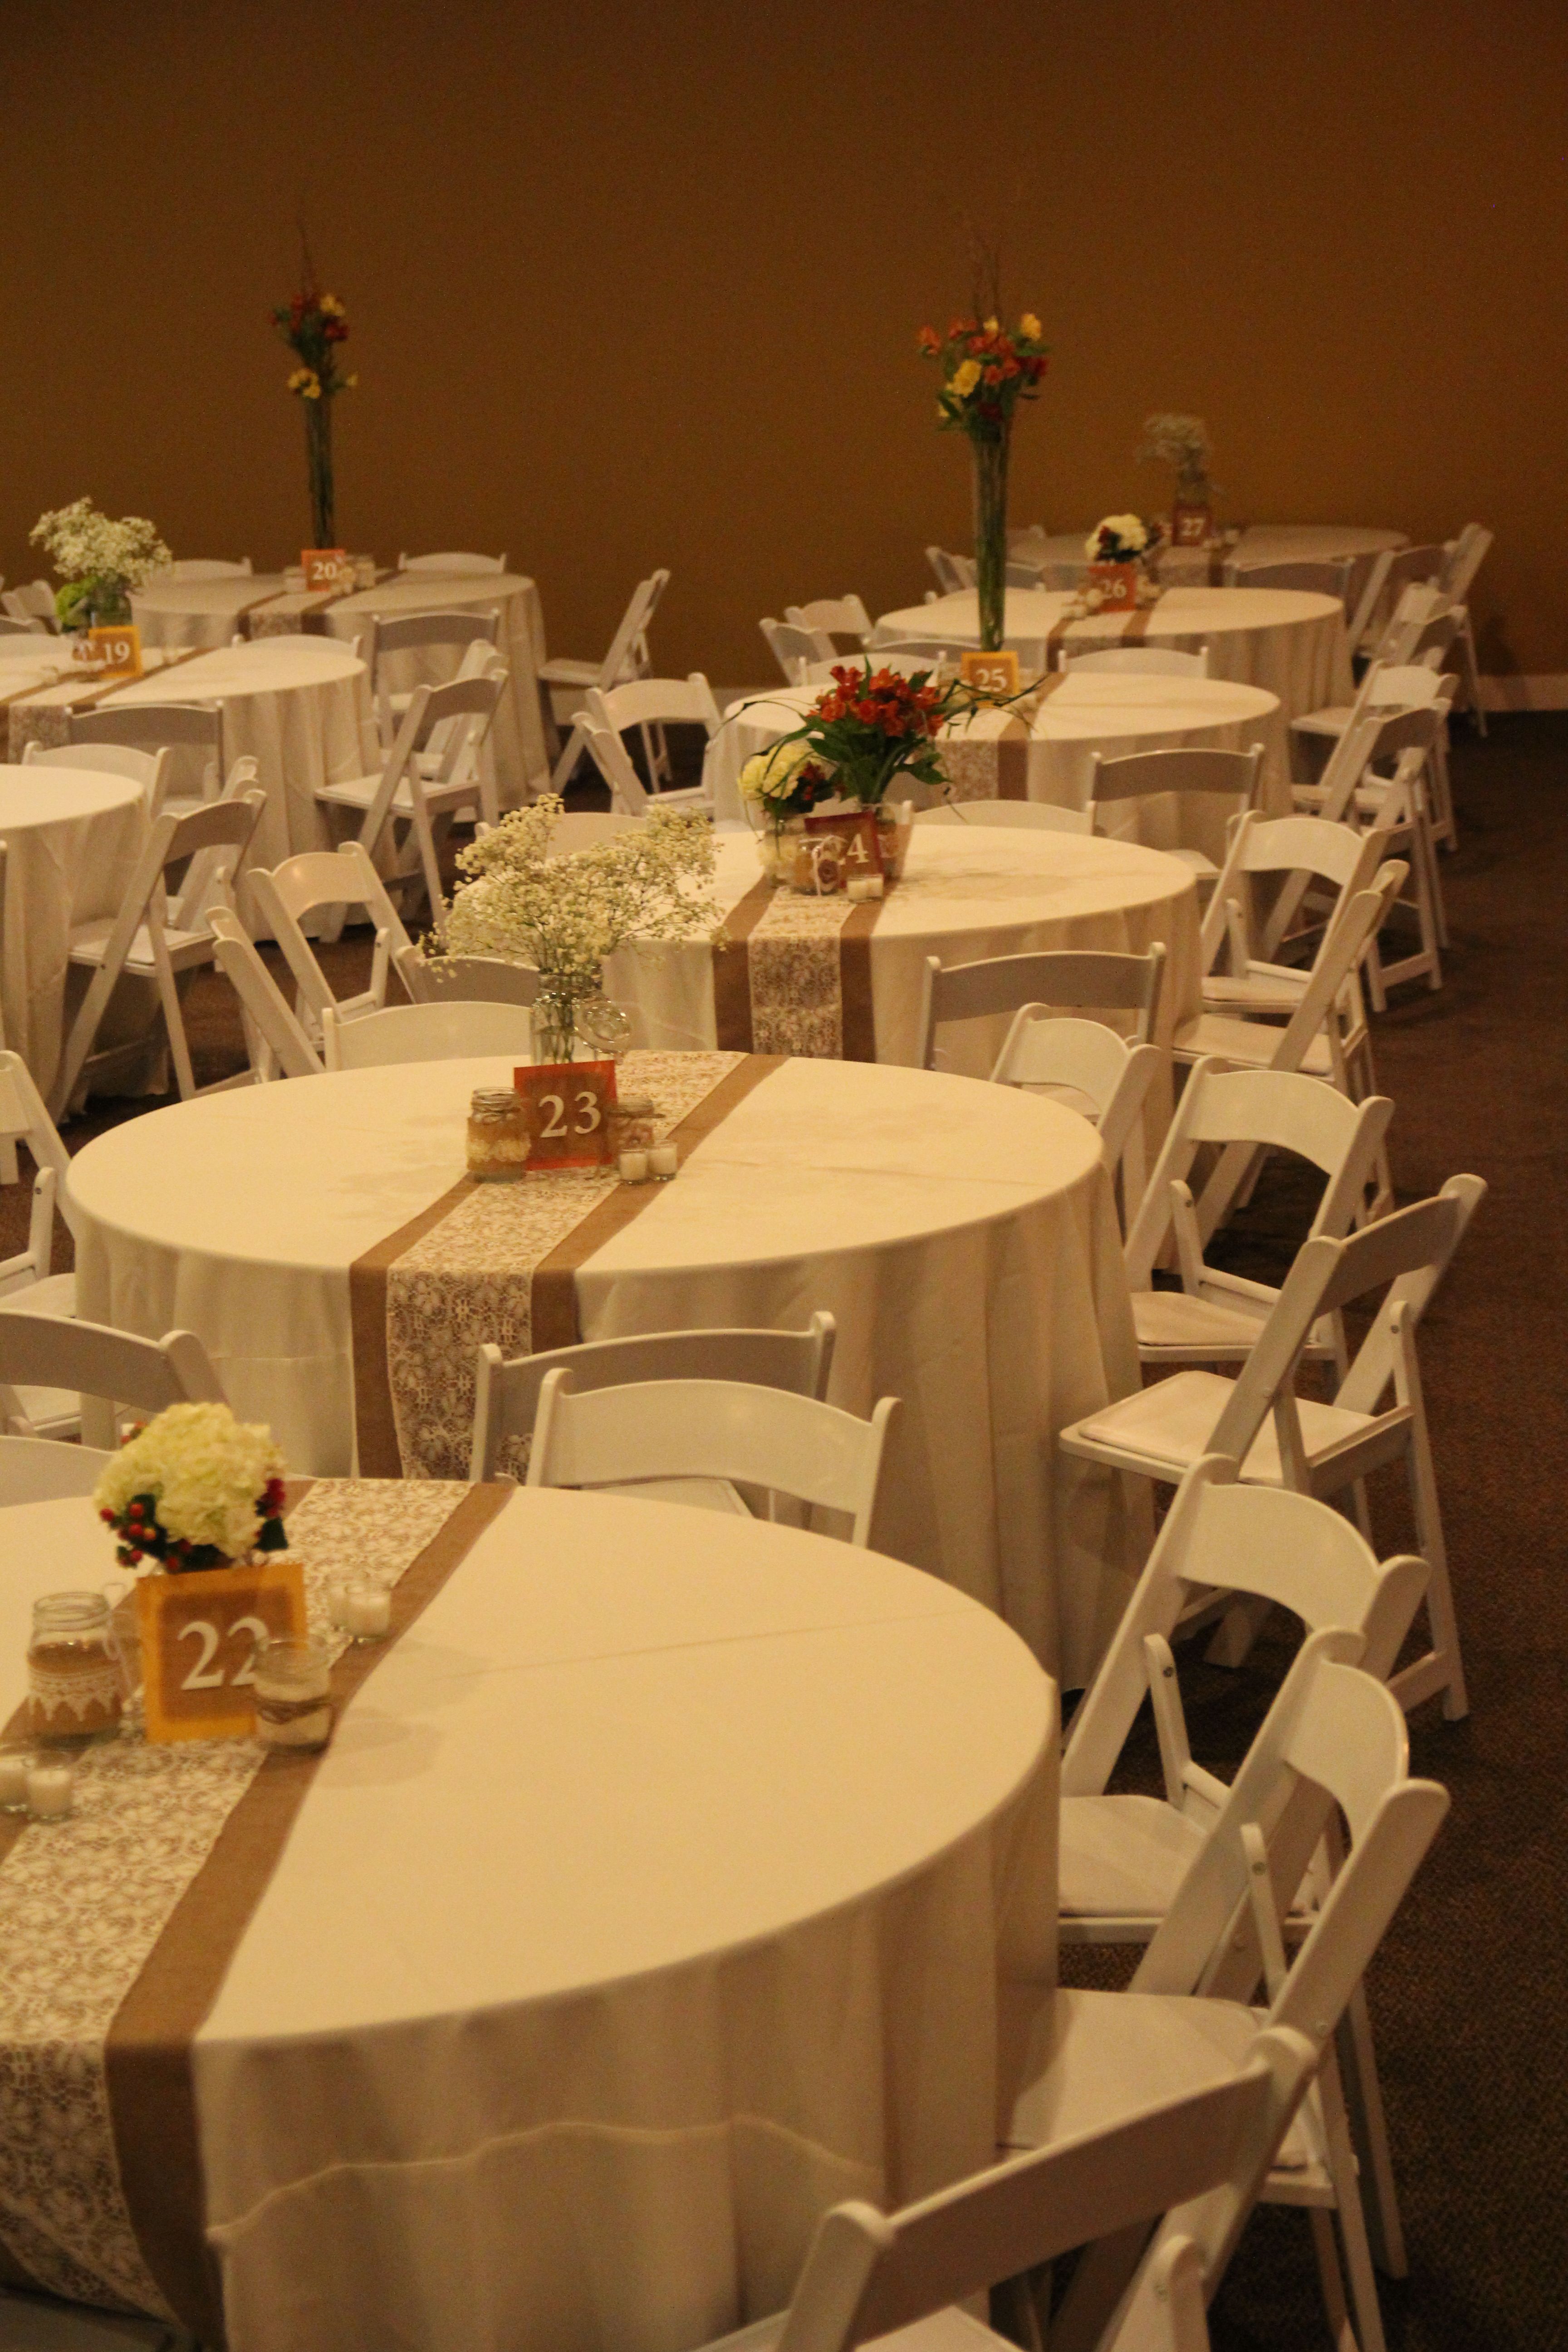 Fall Wedding. Burlap and lace table runner. Simple decoration for a great rustic chic wedding. Reception decorations!